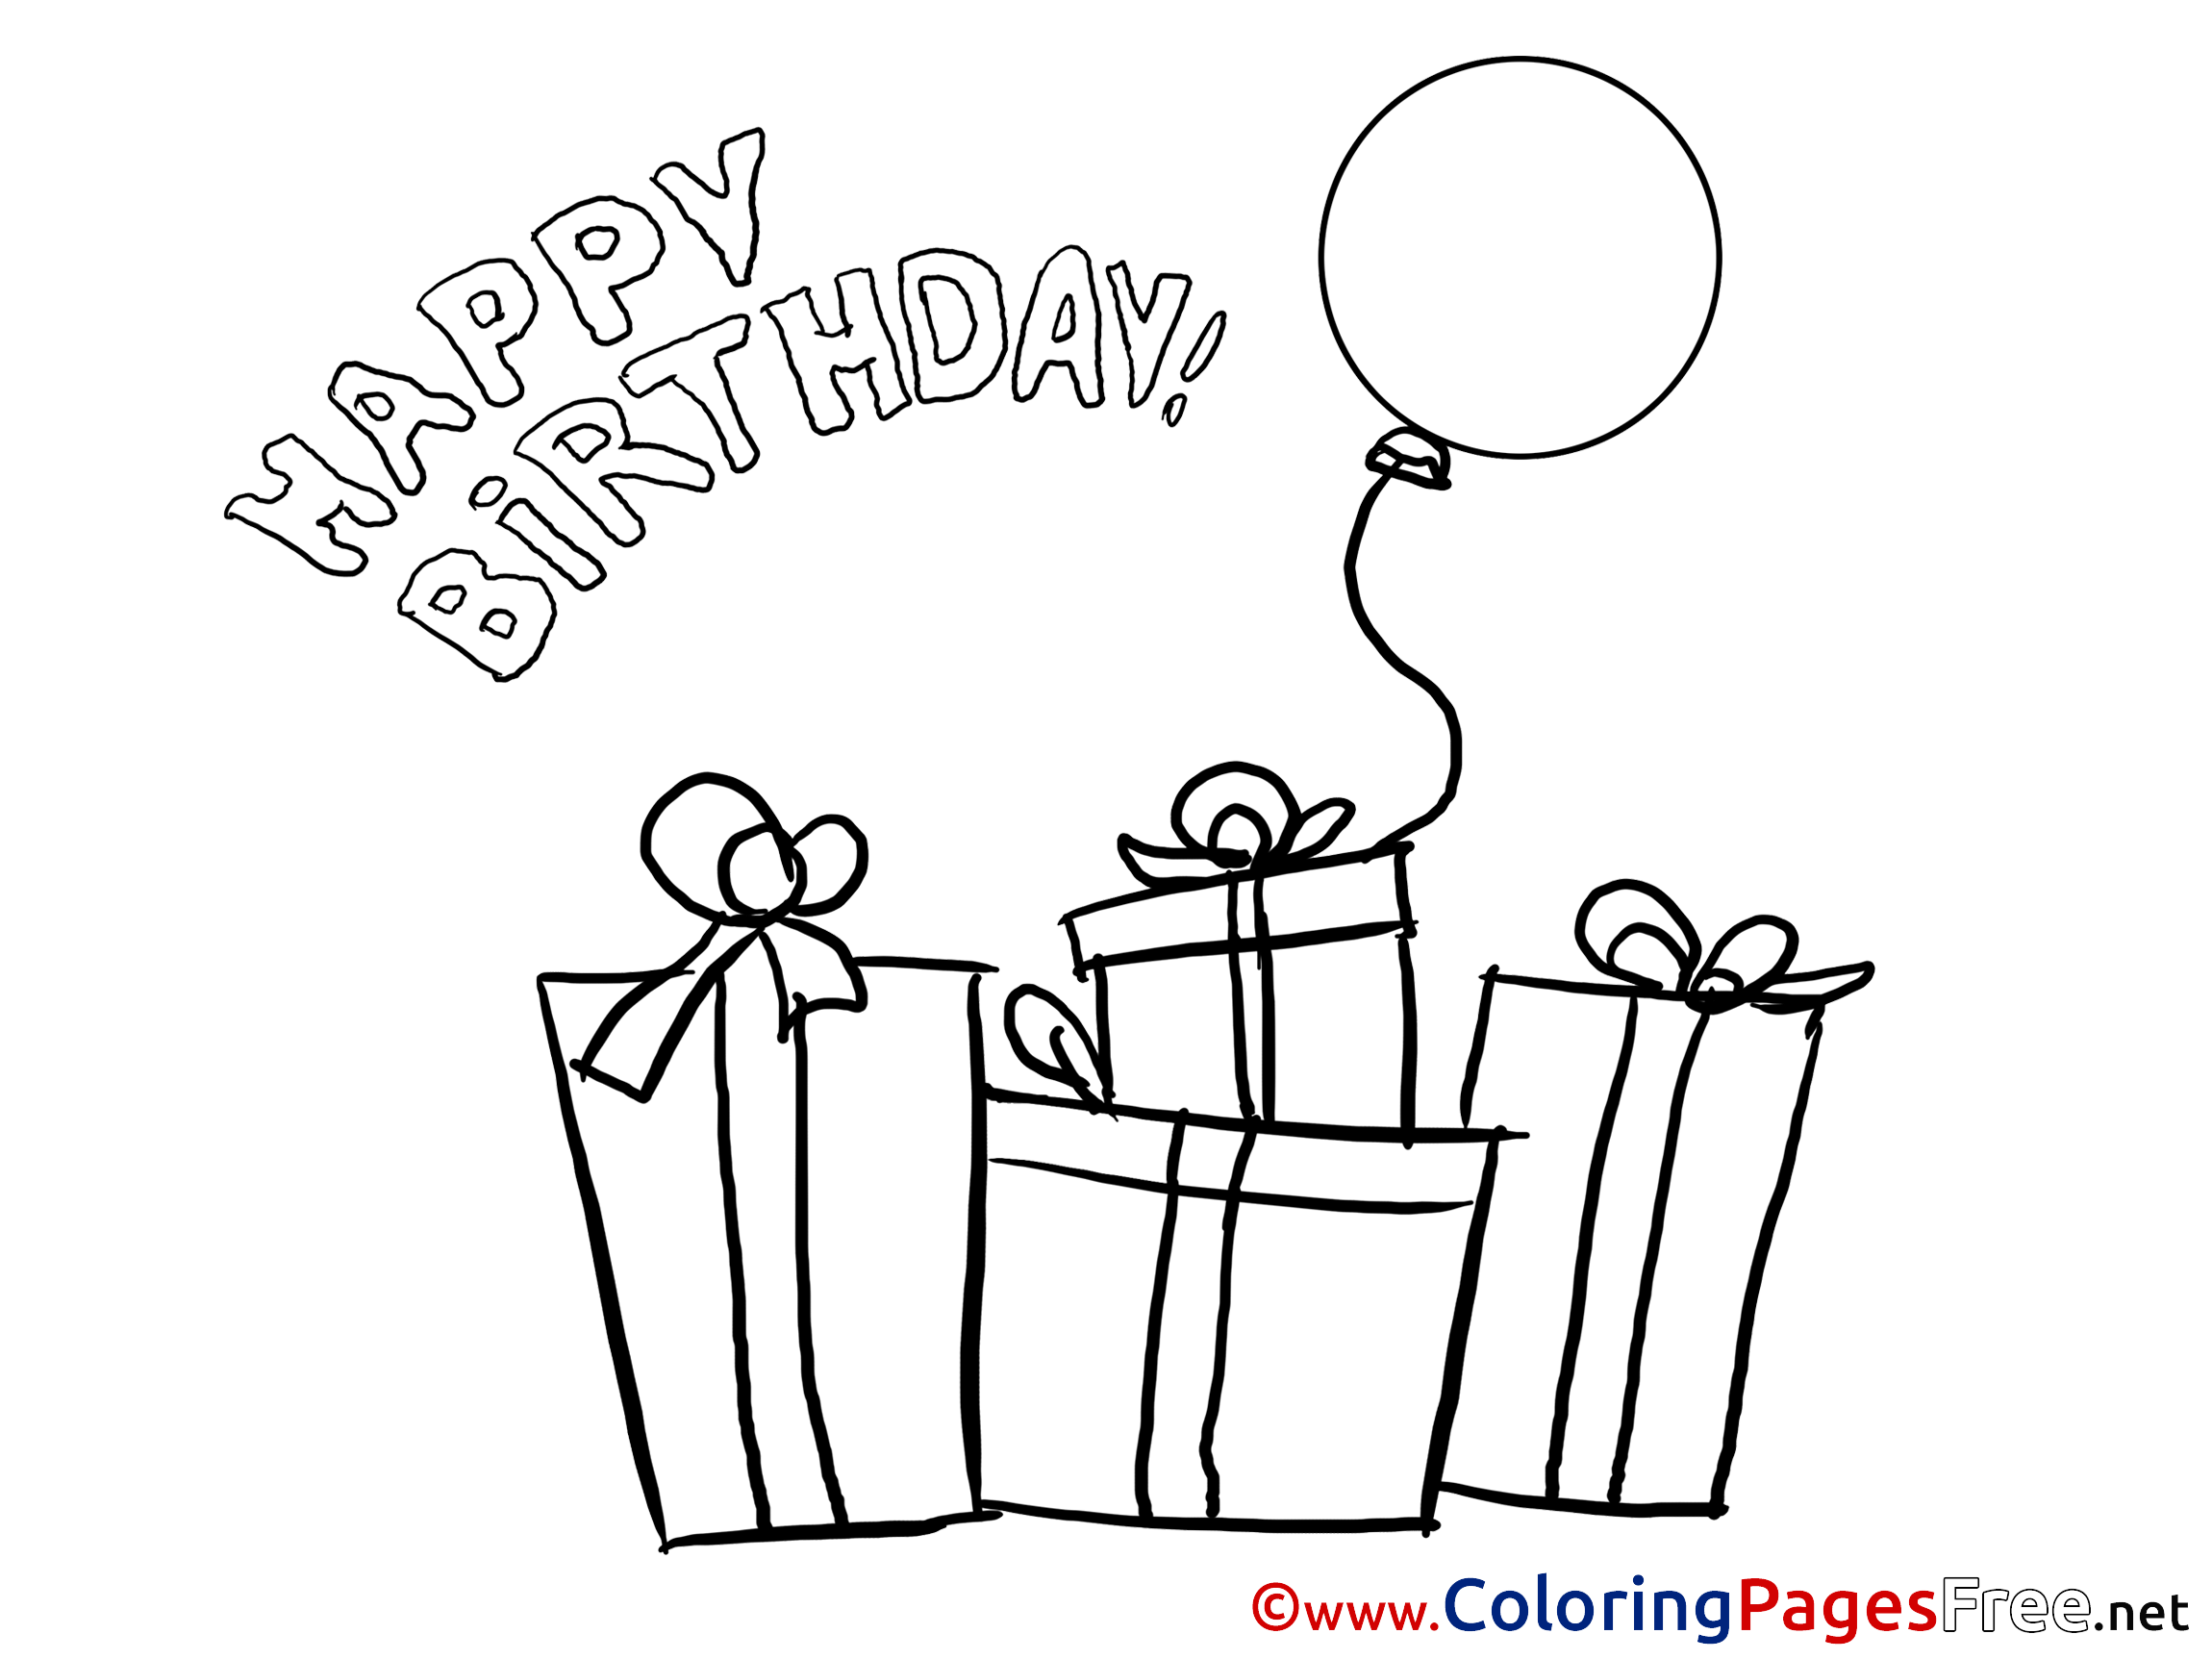 Presents Colouring Sheet download Happy Birthday